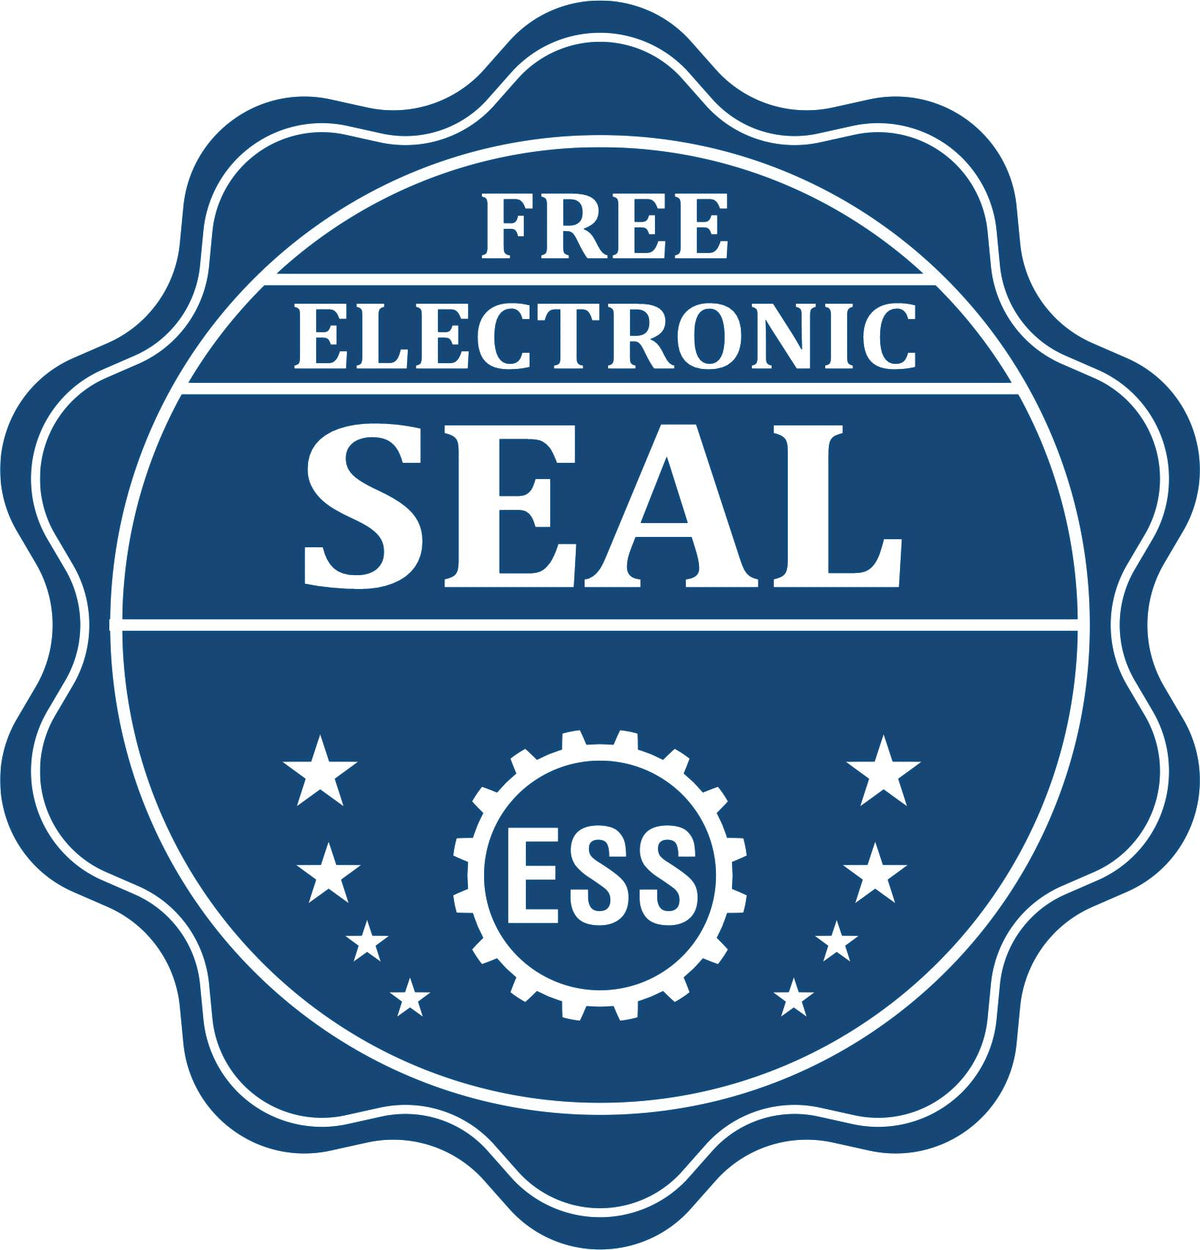 A badge showing a free electronic seal for the State of Maine Extended Long Reach Engineer Seal with stars and the ESS gear on the emblem.